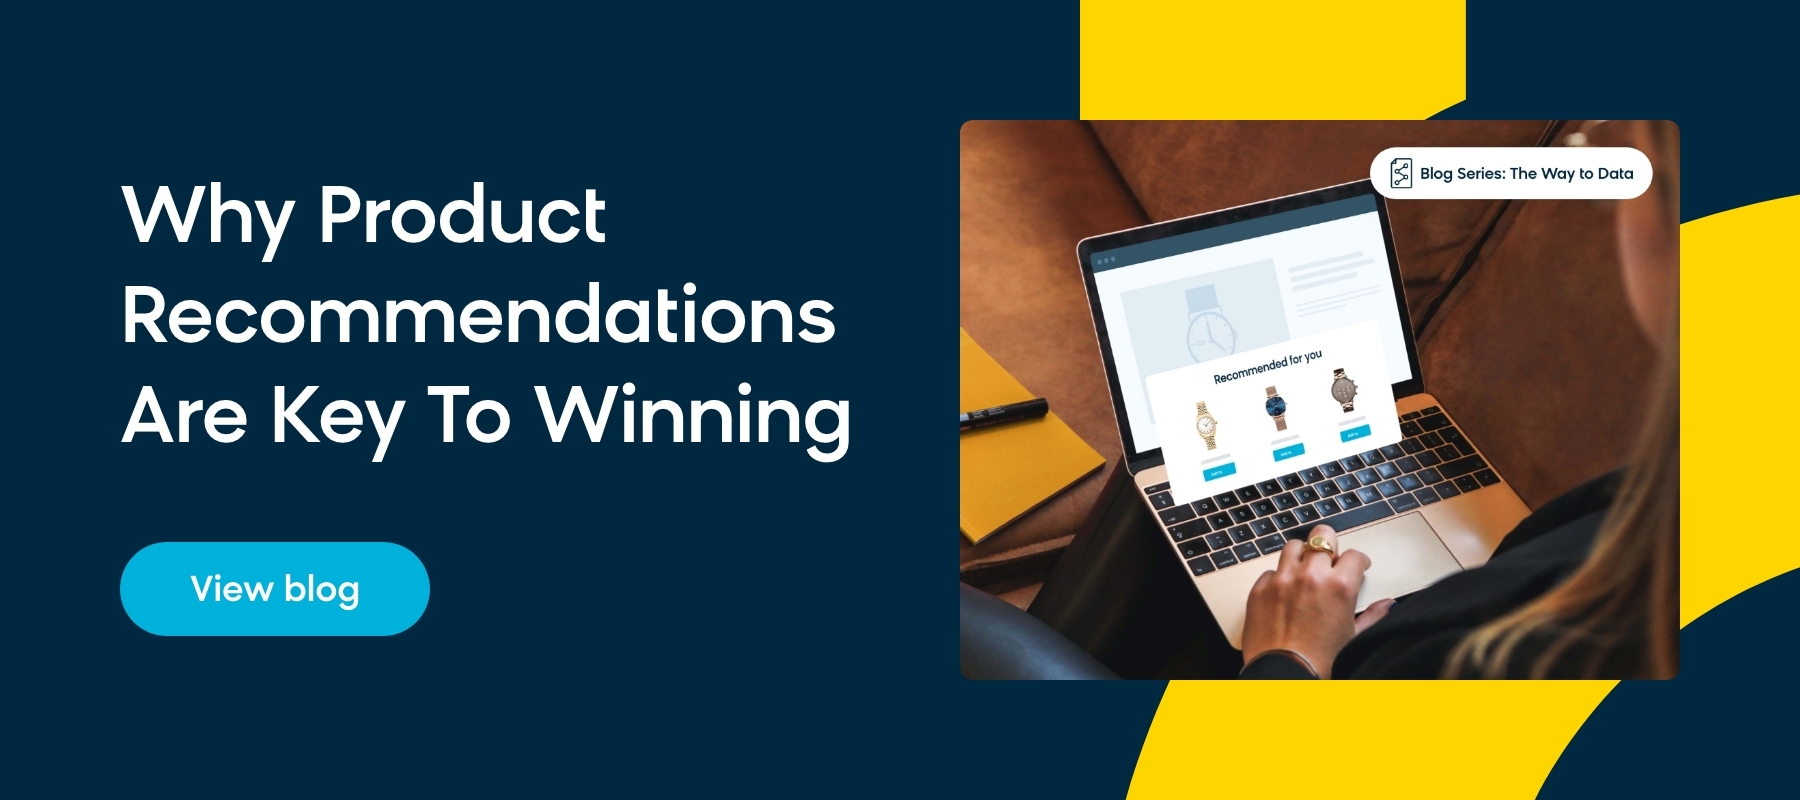 Why product recommendations are key to winning